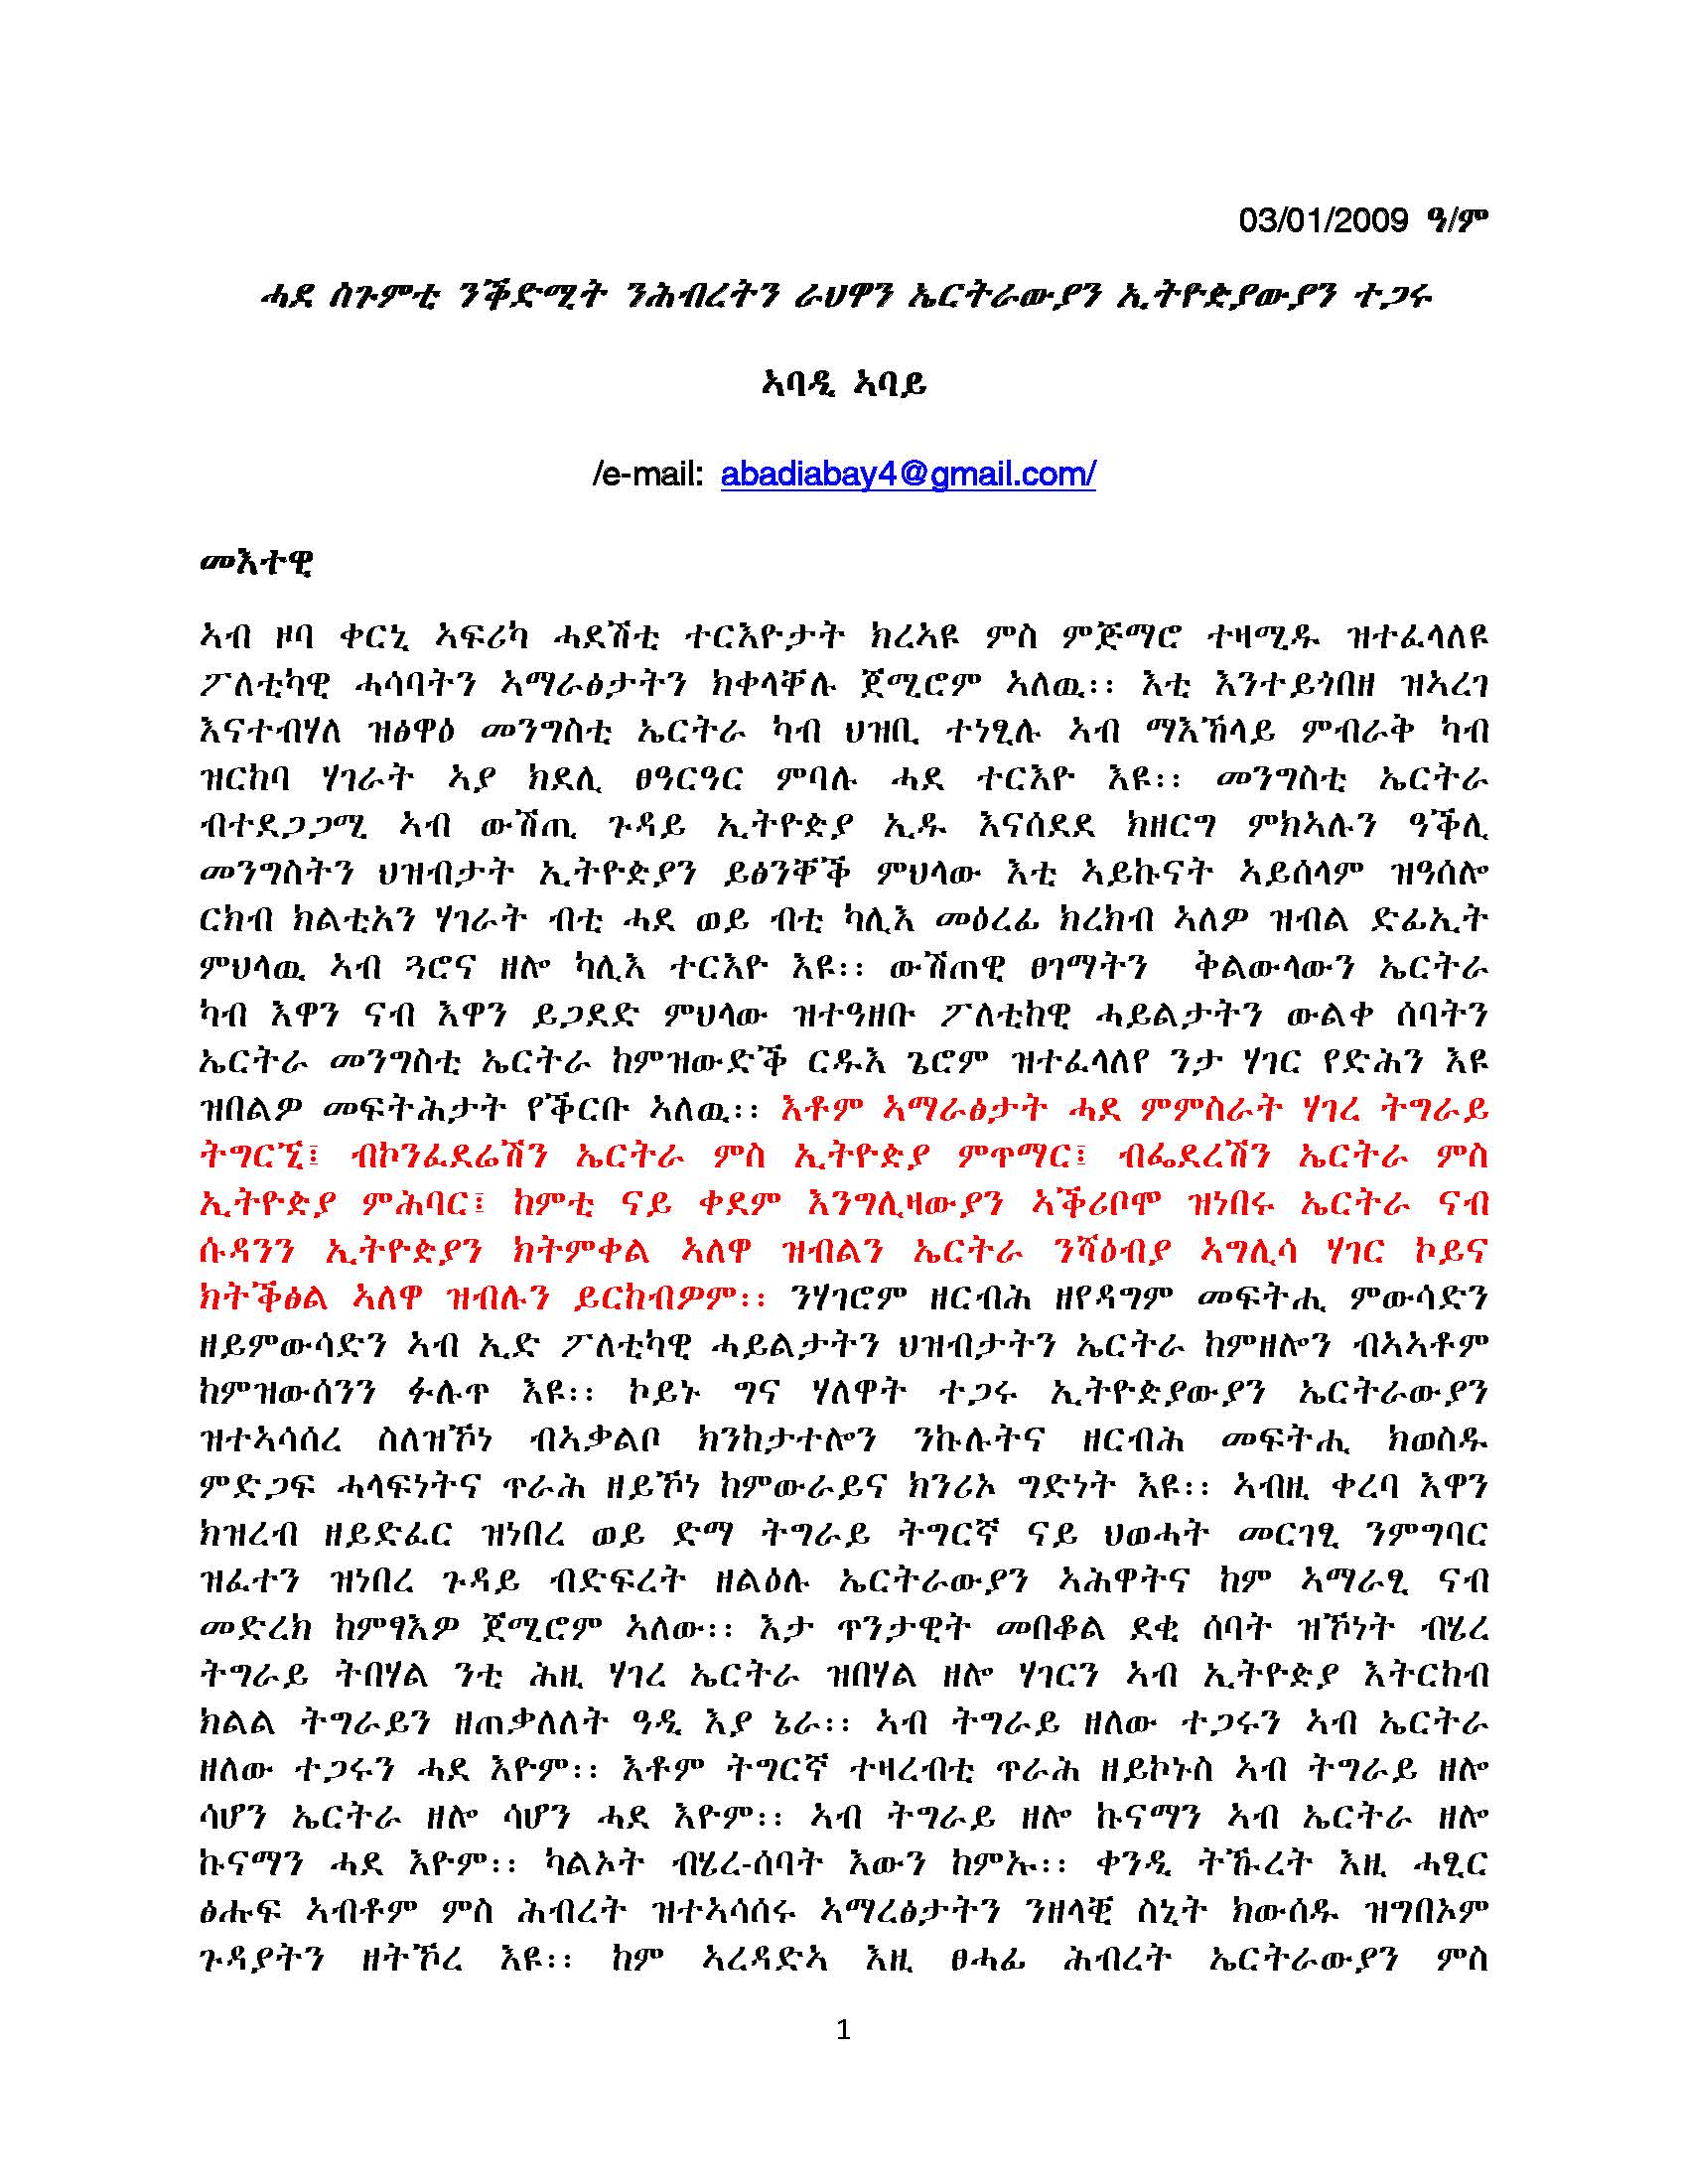 one-step-forward-for-tigreans-and-eritreans_page_01